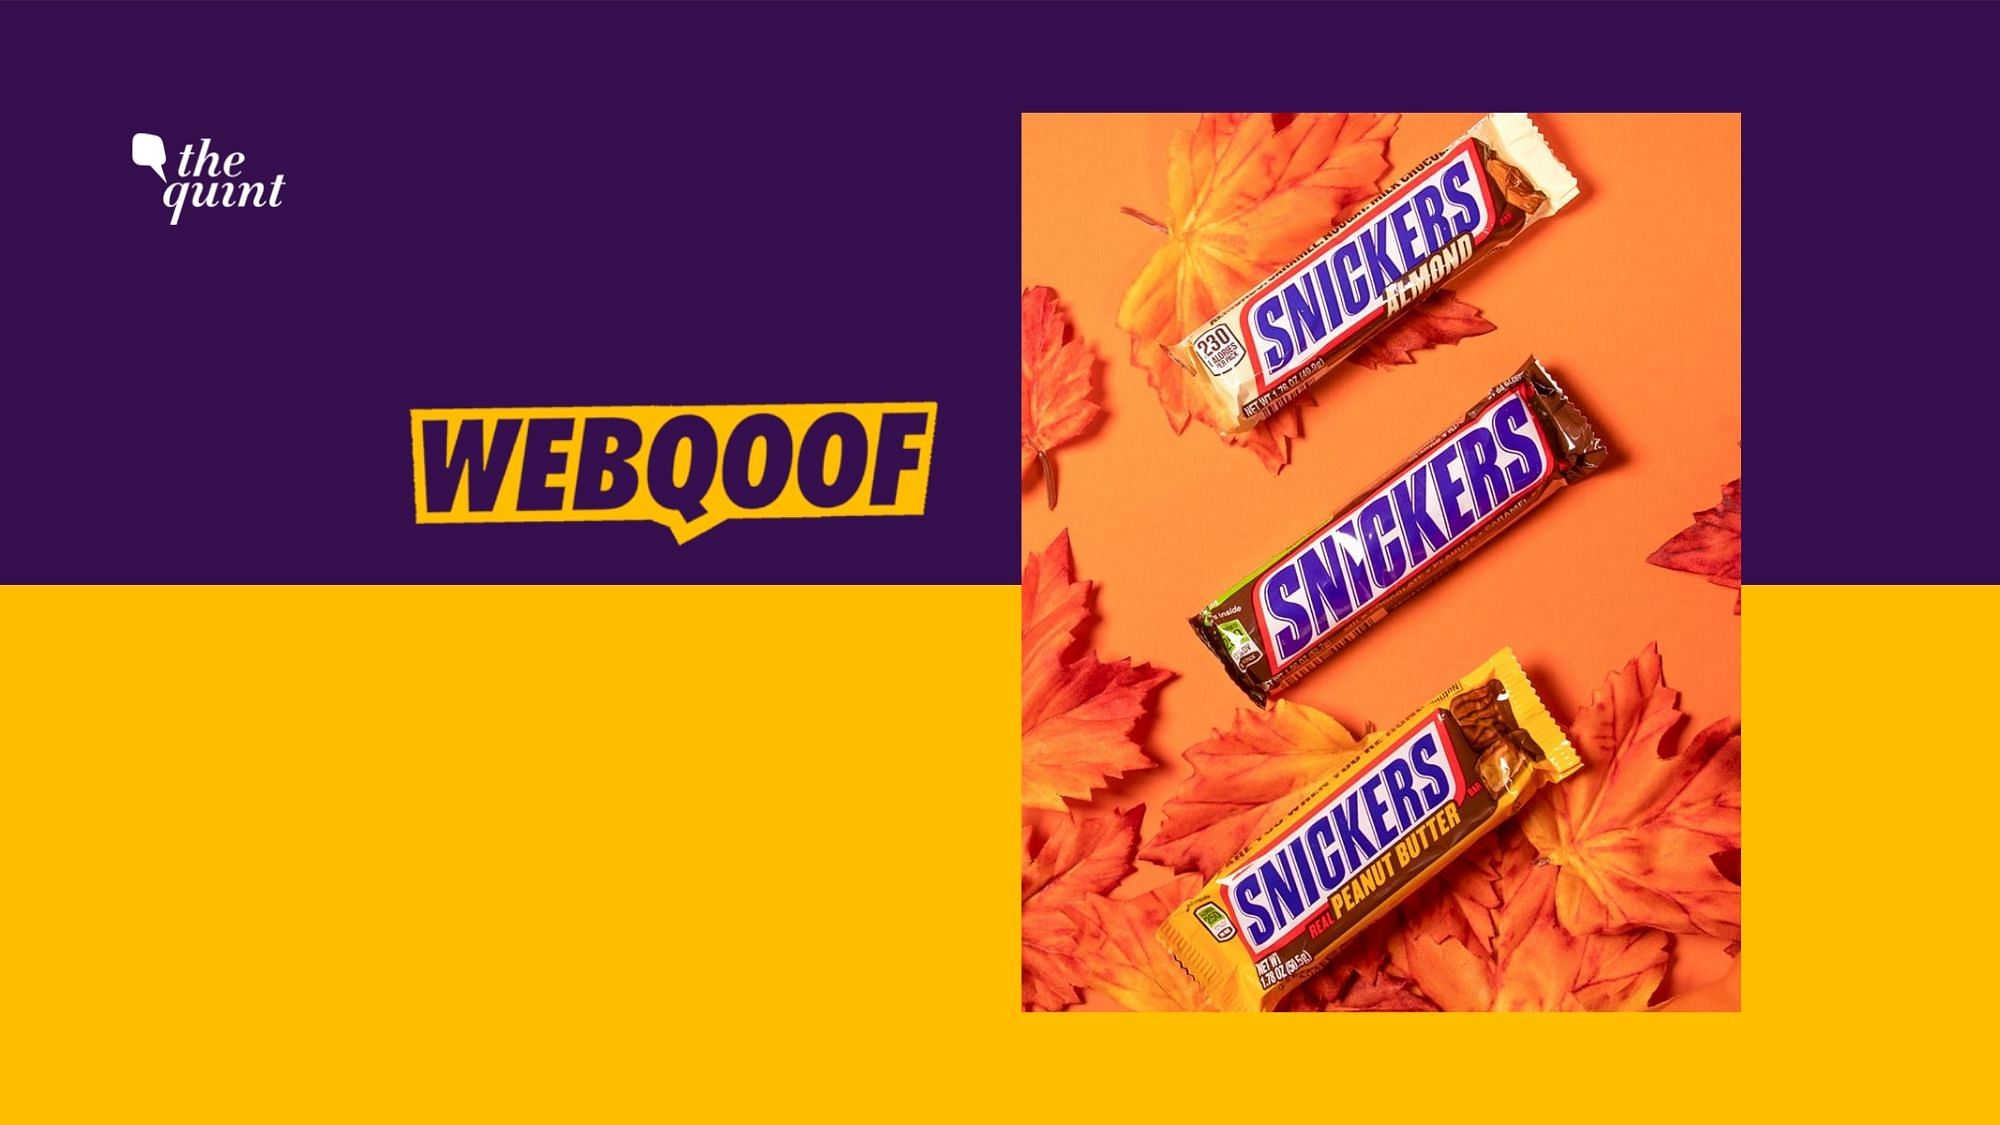 A post on social media claims that Snicker bars have been banned as they cause cancer.&nbsp;